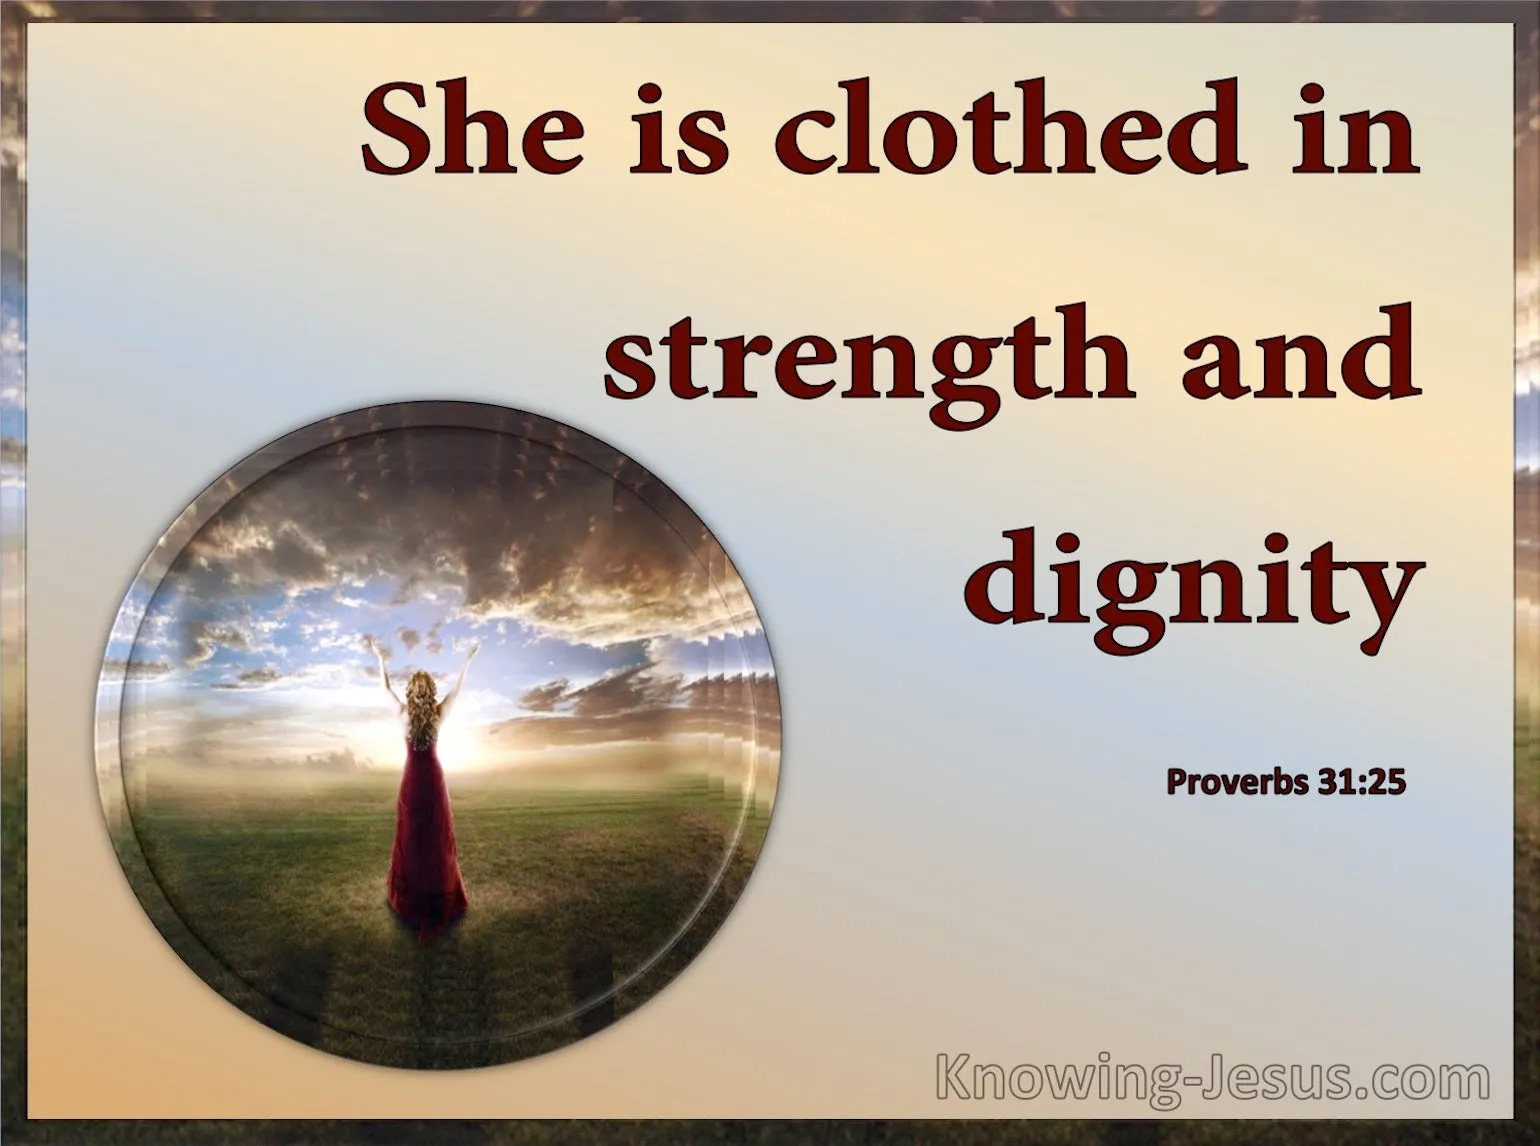 meaning of proverbs 31 25